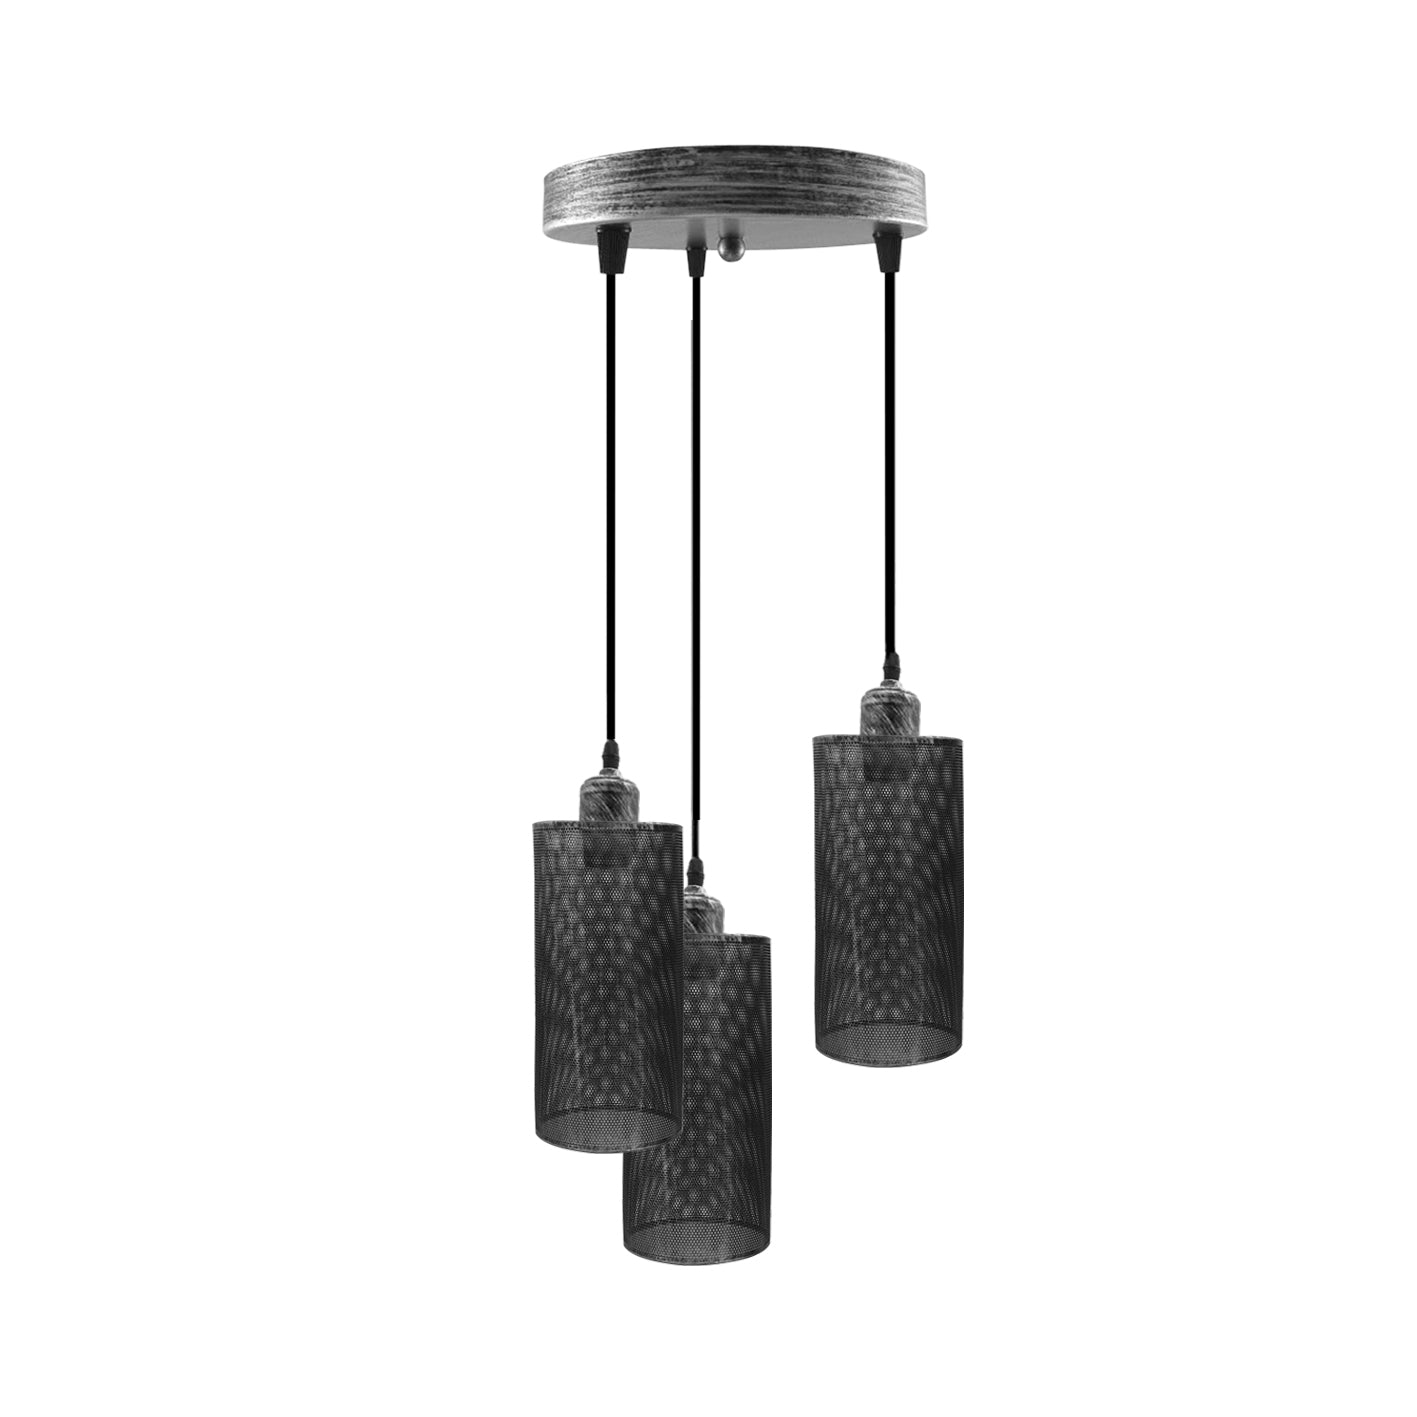 Industrial Retro 3 Way Drum Brushed Silver Cage Pendant Light